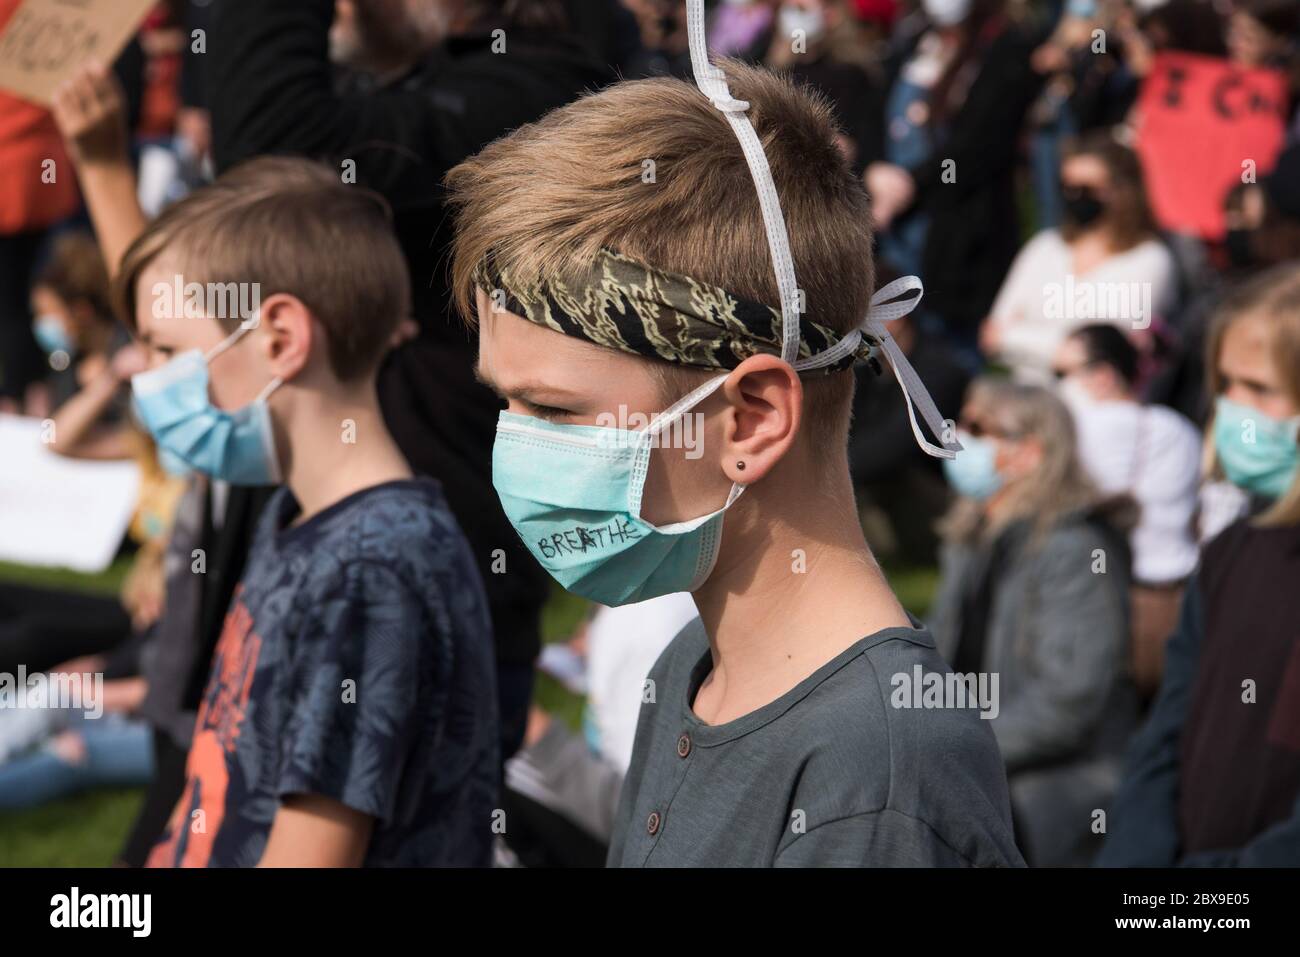 Adelaide, Australia. 06th June, 2020. Kids wearing face masks during the protest. Thousands of protesters gathered at Adelaide's Victoria Square demonstrating in support of the Black Lives Matter movement and against Aboriginal Australian deaths in custody. Sparked by the death of African American George Floyd at the hands of a white police officer in the US state of Minneapolis, protests were observed in all major Australian cities. Credit: SOPA Images Limited/Alamy Live News Stock Photo